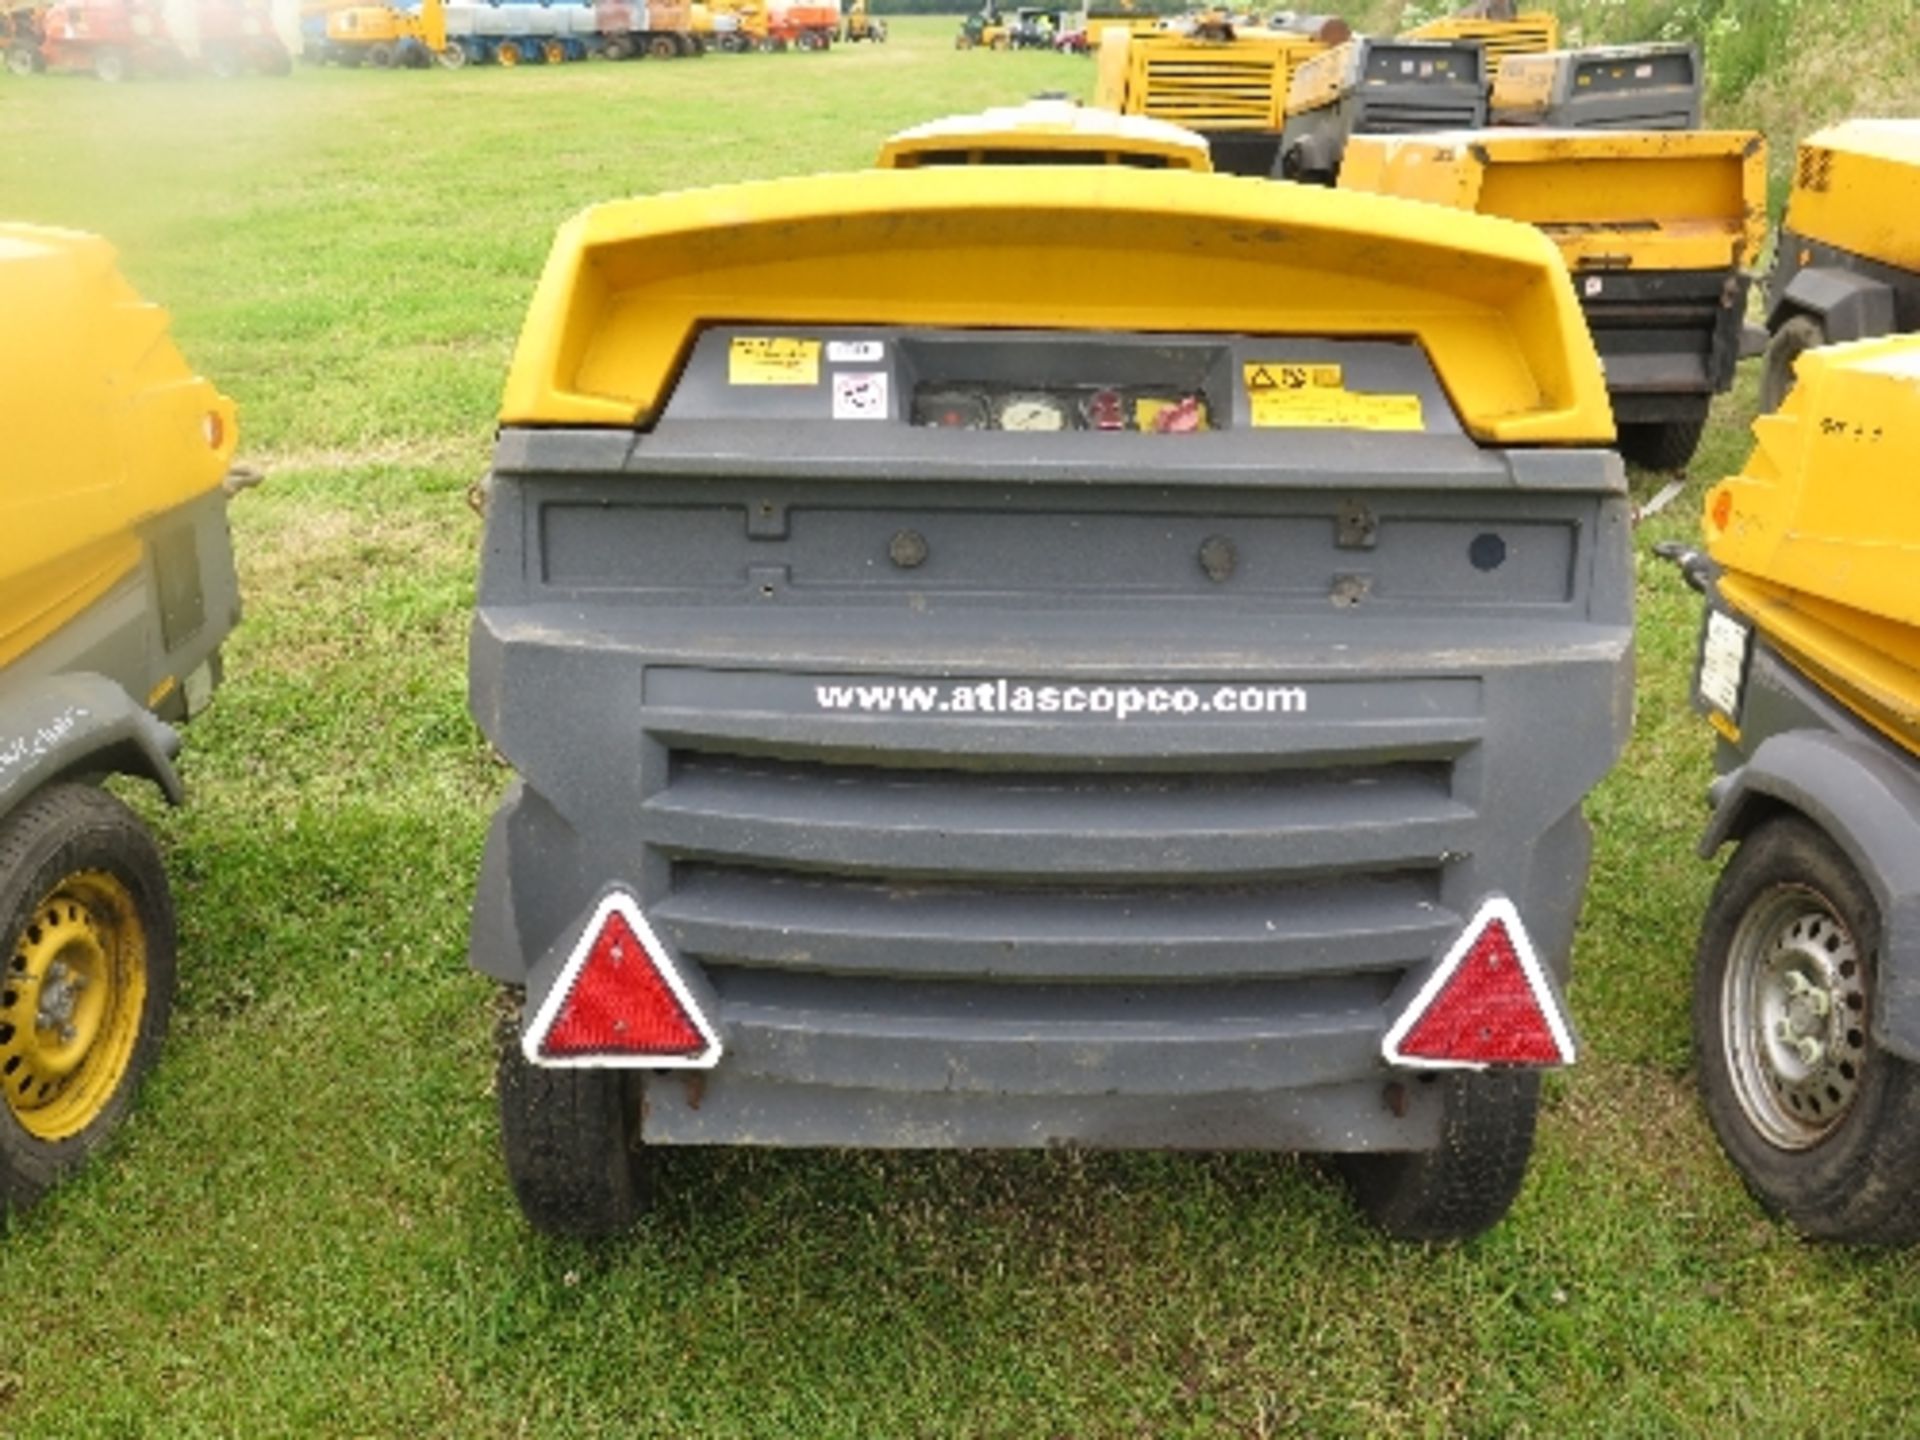 Atlas Copco XAS47 compressor 2008 5002442
325 HOURS - KUBOTA - RUNS AND MAKES AIR
ALL LOTS are - Image 2 of 5